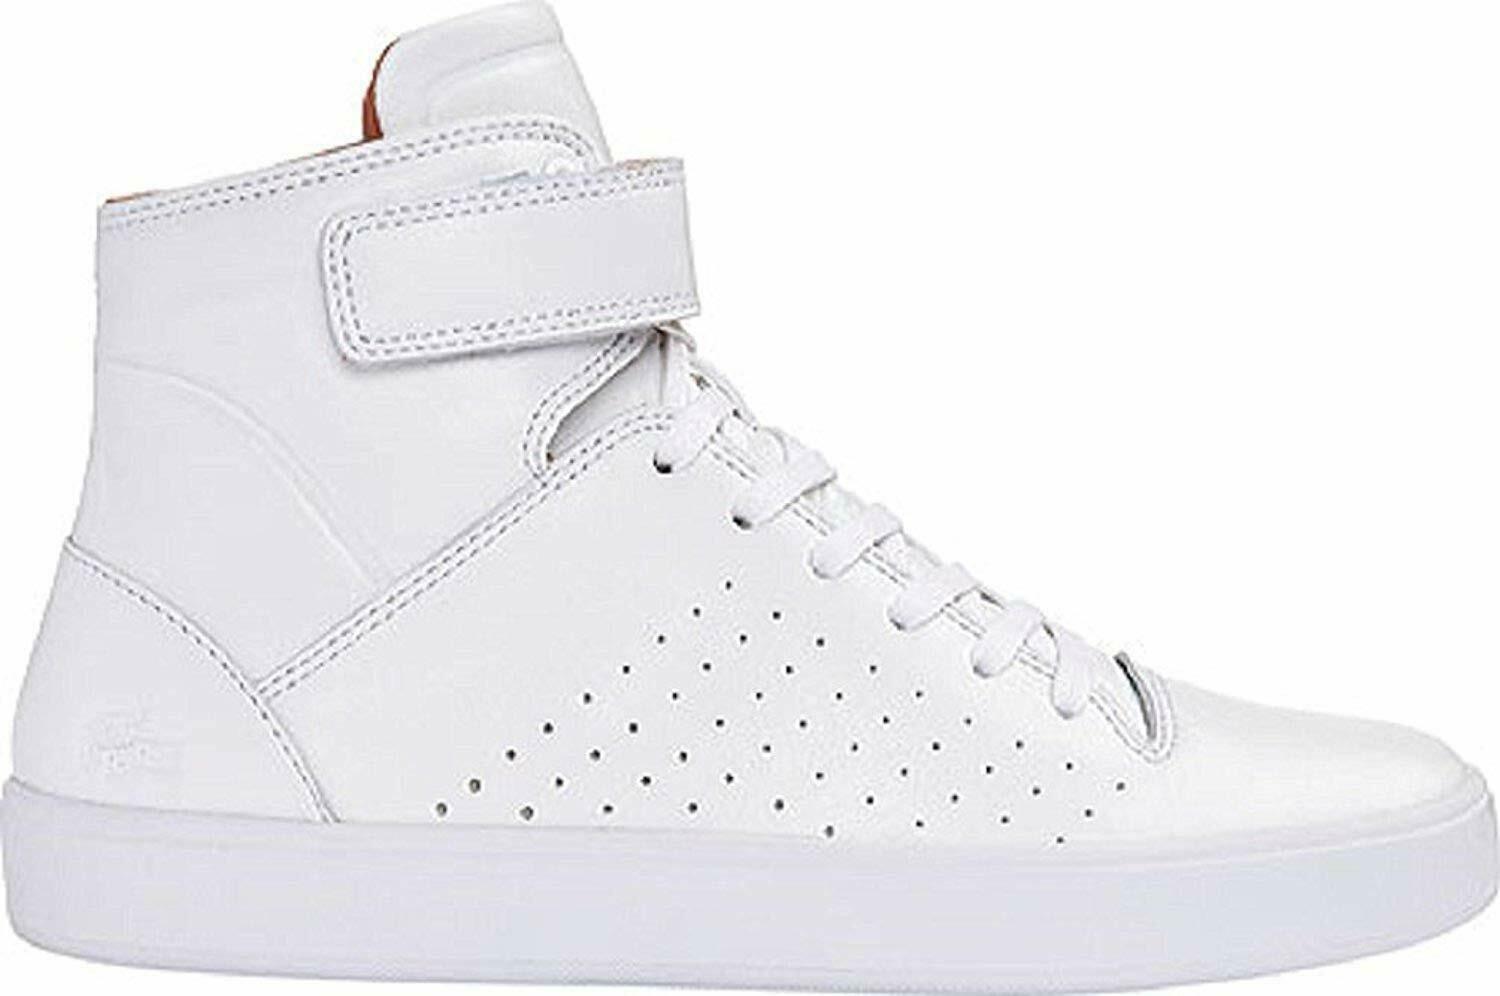 Lacoste Women's Tamora Hi 116 2 High Top Sneaker,White Leather Size US 10 - SVNYFancy